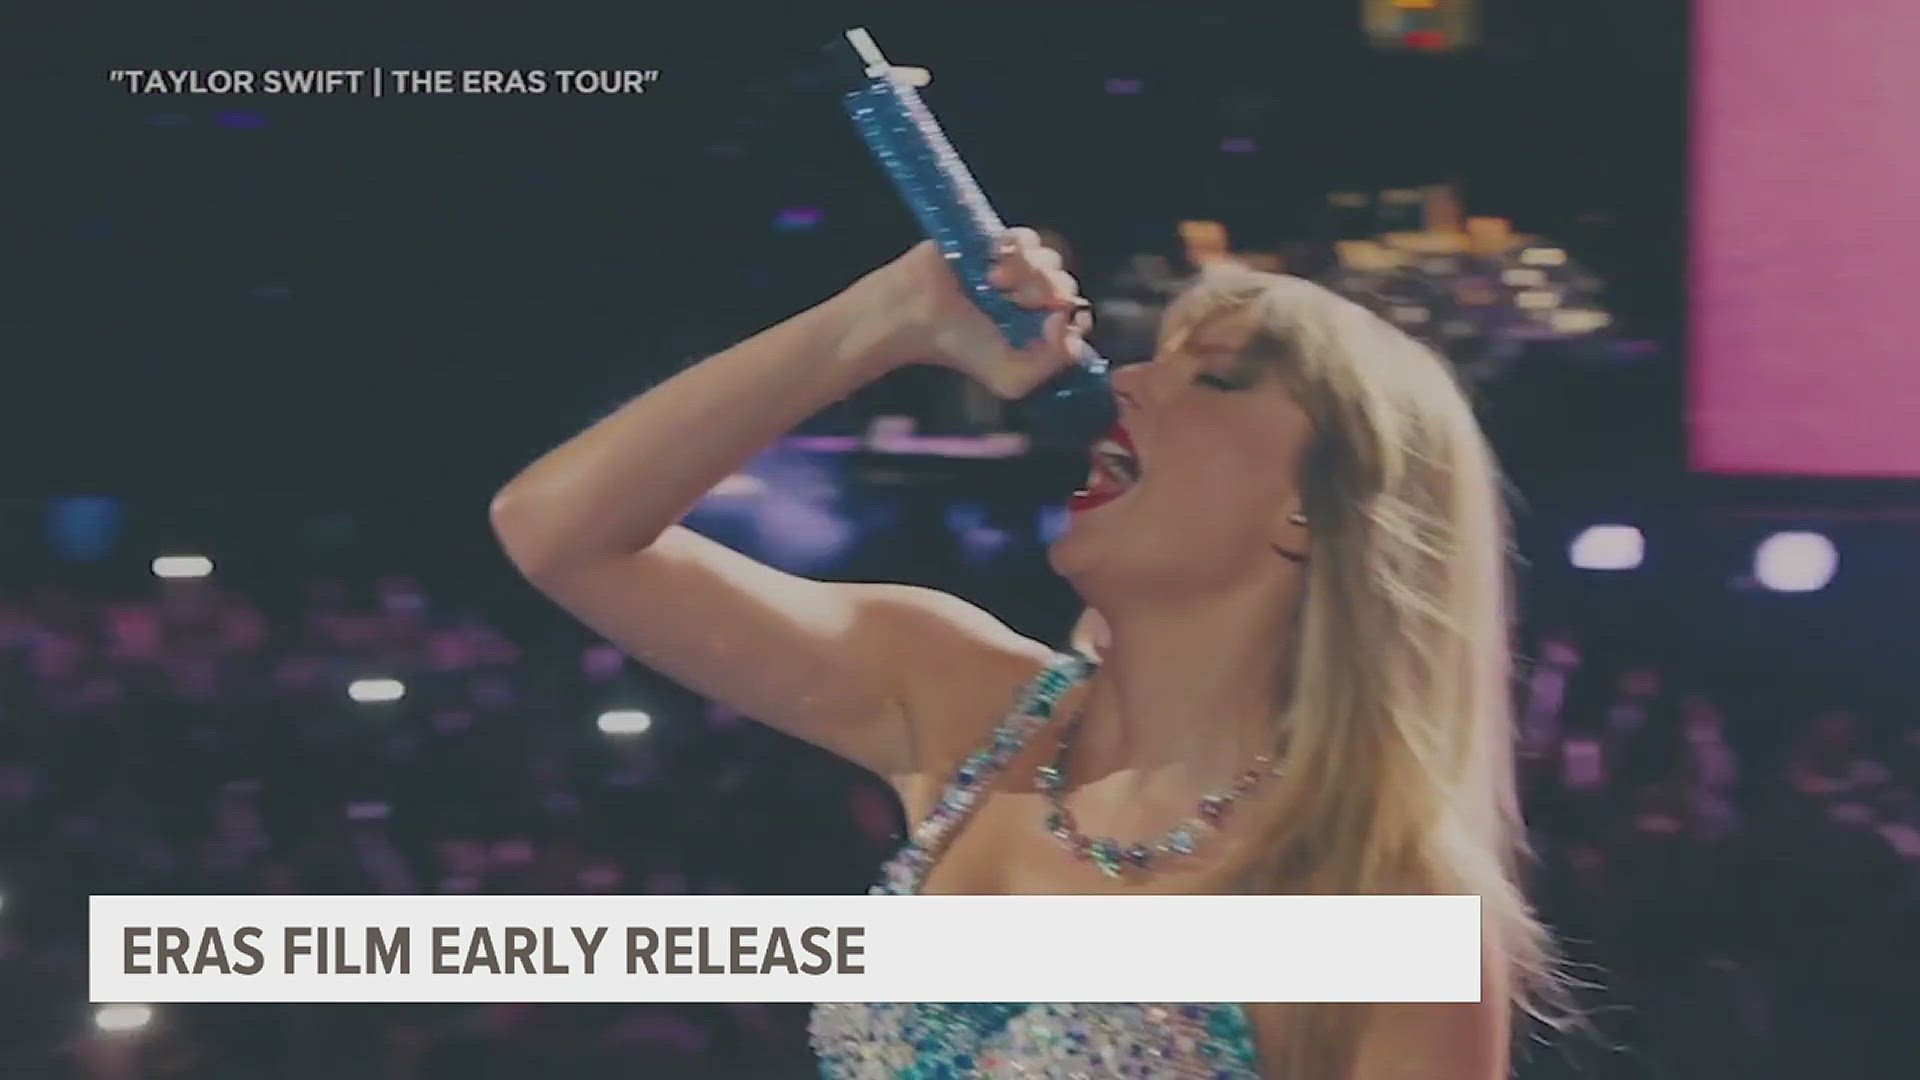 Taylor Swift's Eras Tour Concert Film Is Coming a Day Early